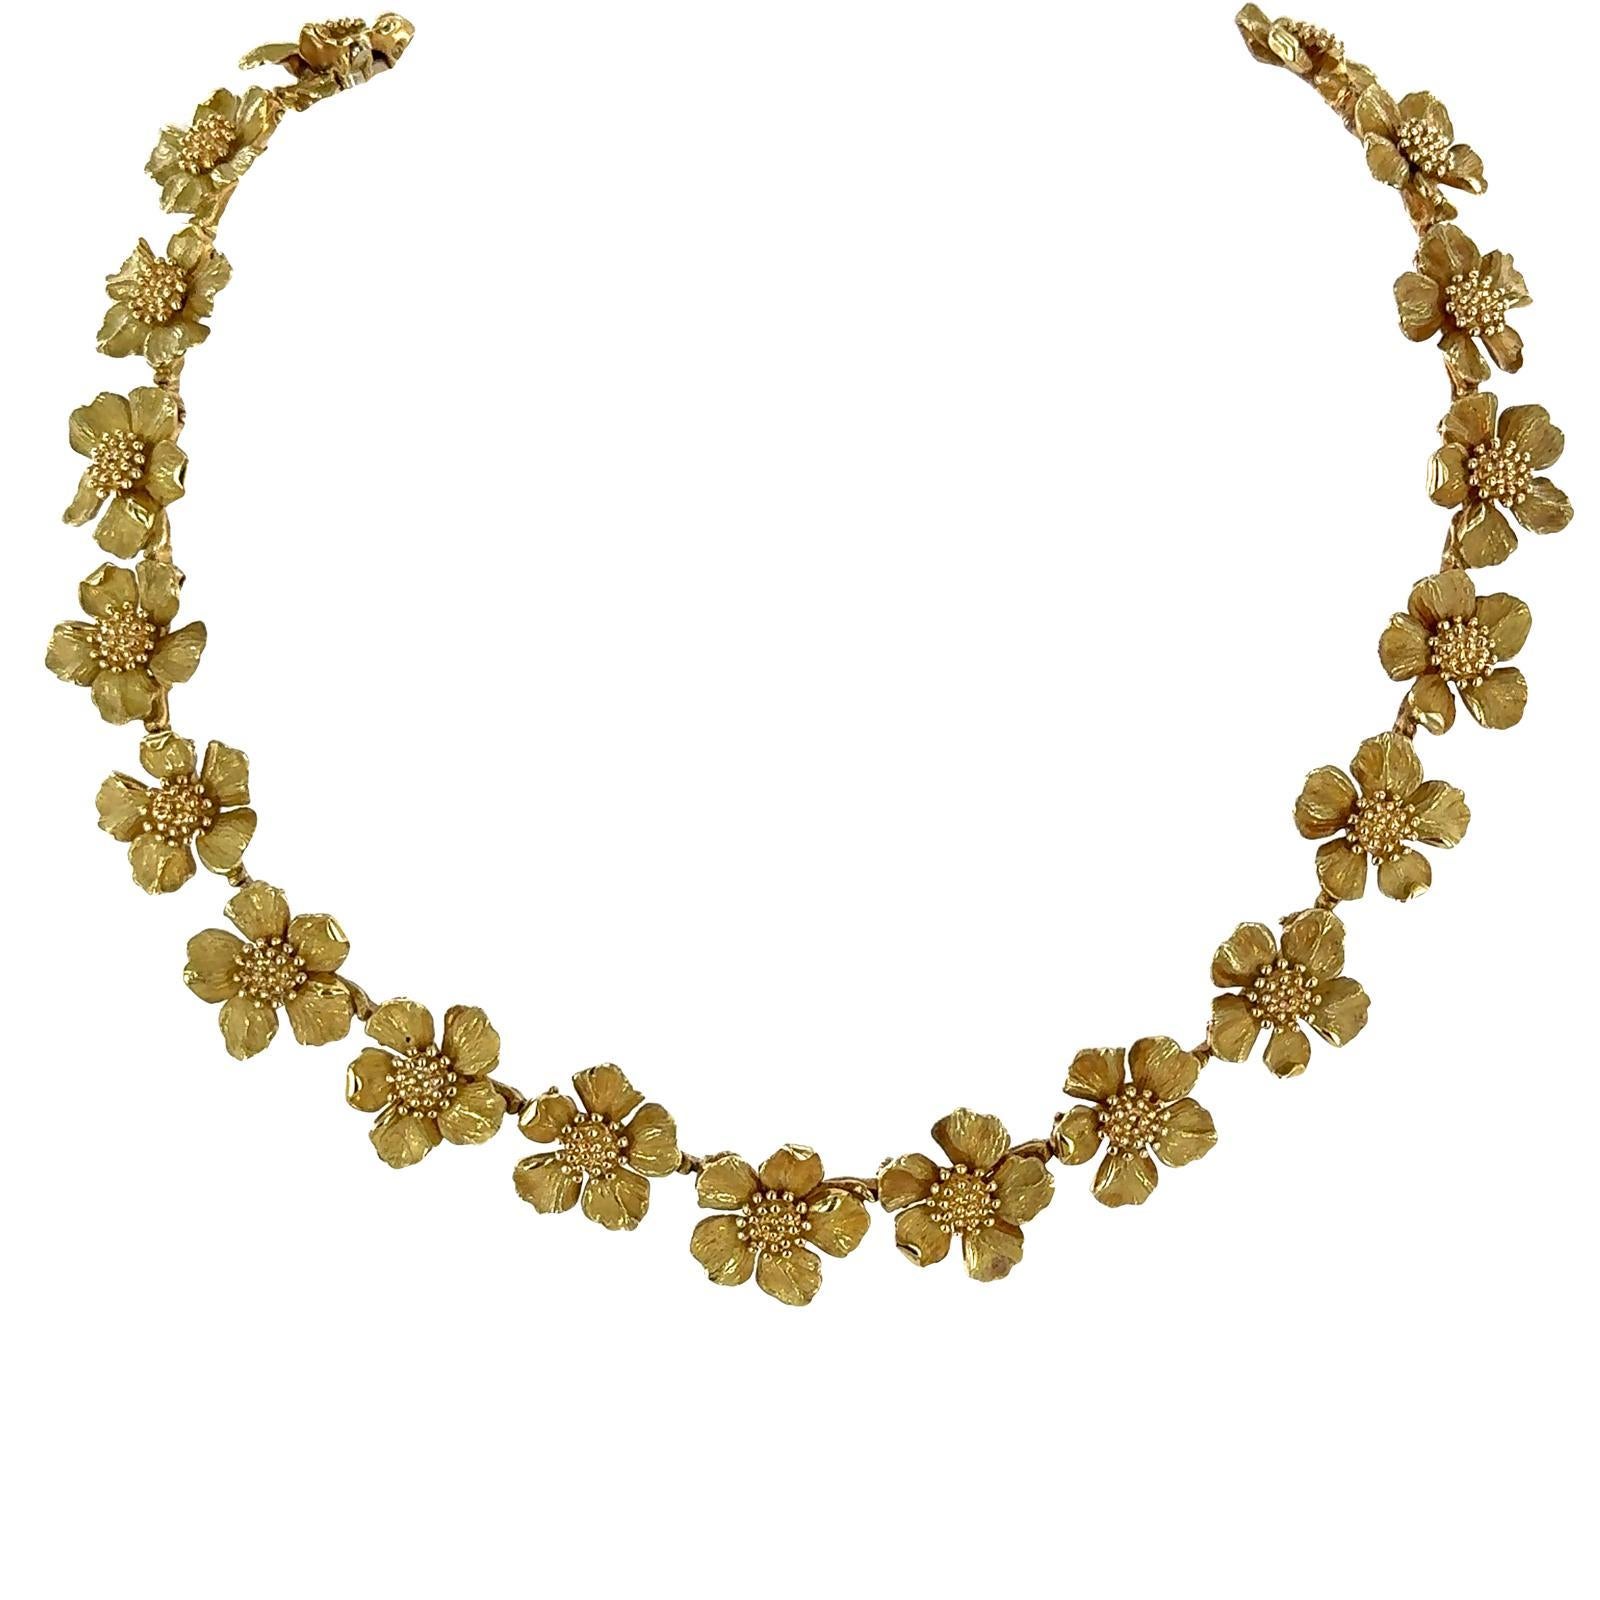 Modern Tiffany & Company Classics Wild Rose Dogwood Flower 18KY Gold Vintage Necklace. For Sale